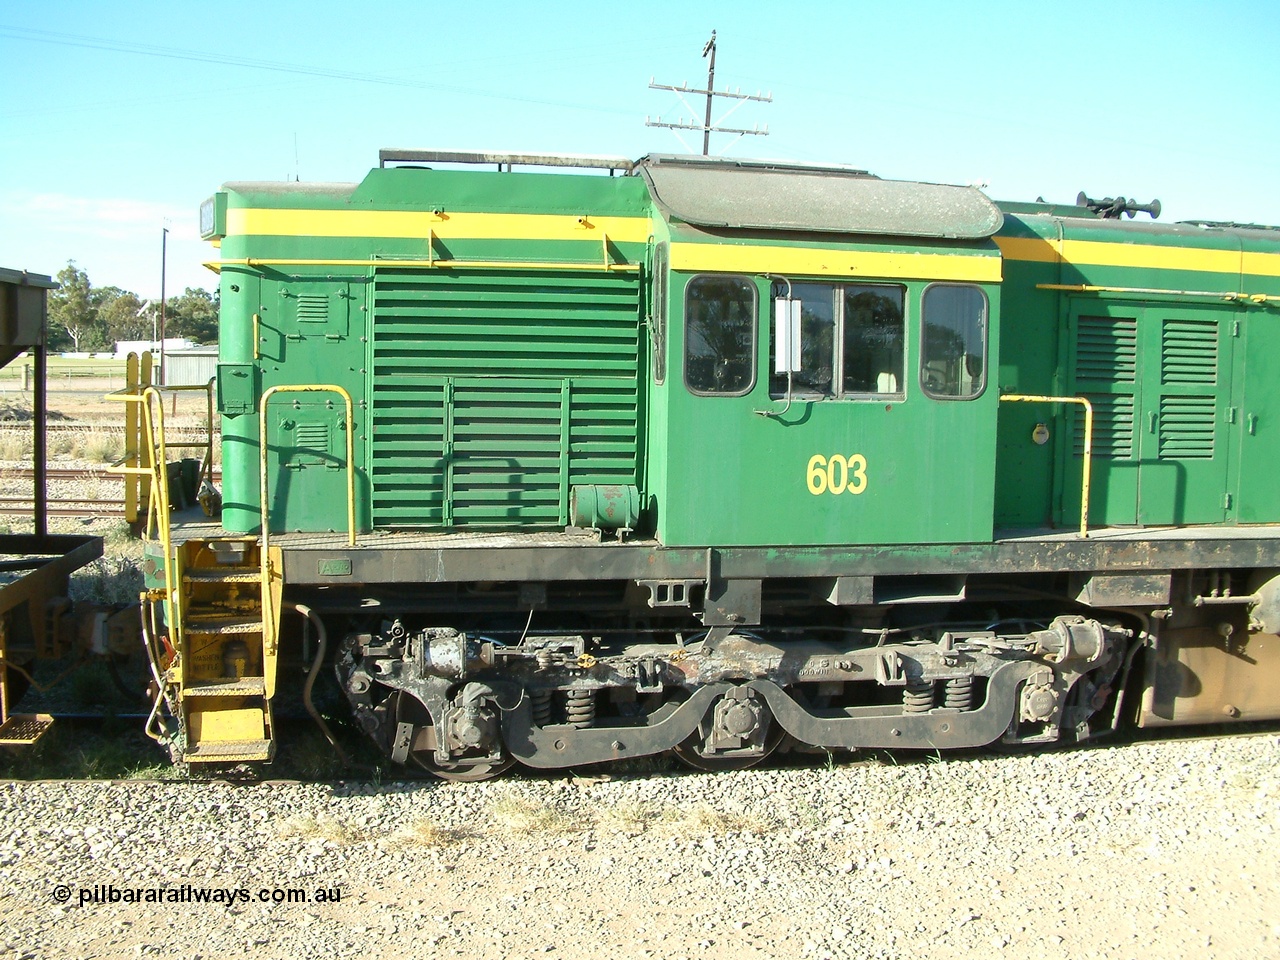 030403 162332
Crystal Brook, cab detail view showing tropical roof and bogie of former Australian National 600 class AE Goodwin built ALCo DL541 model 603 serial G6015-3.
Keywords: 600-class;603;G6015-3;AE-Goodwin;ALCo;DL541;